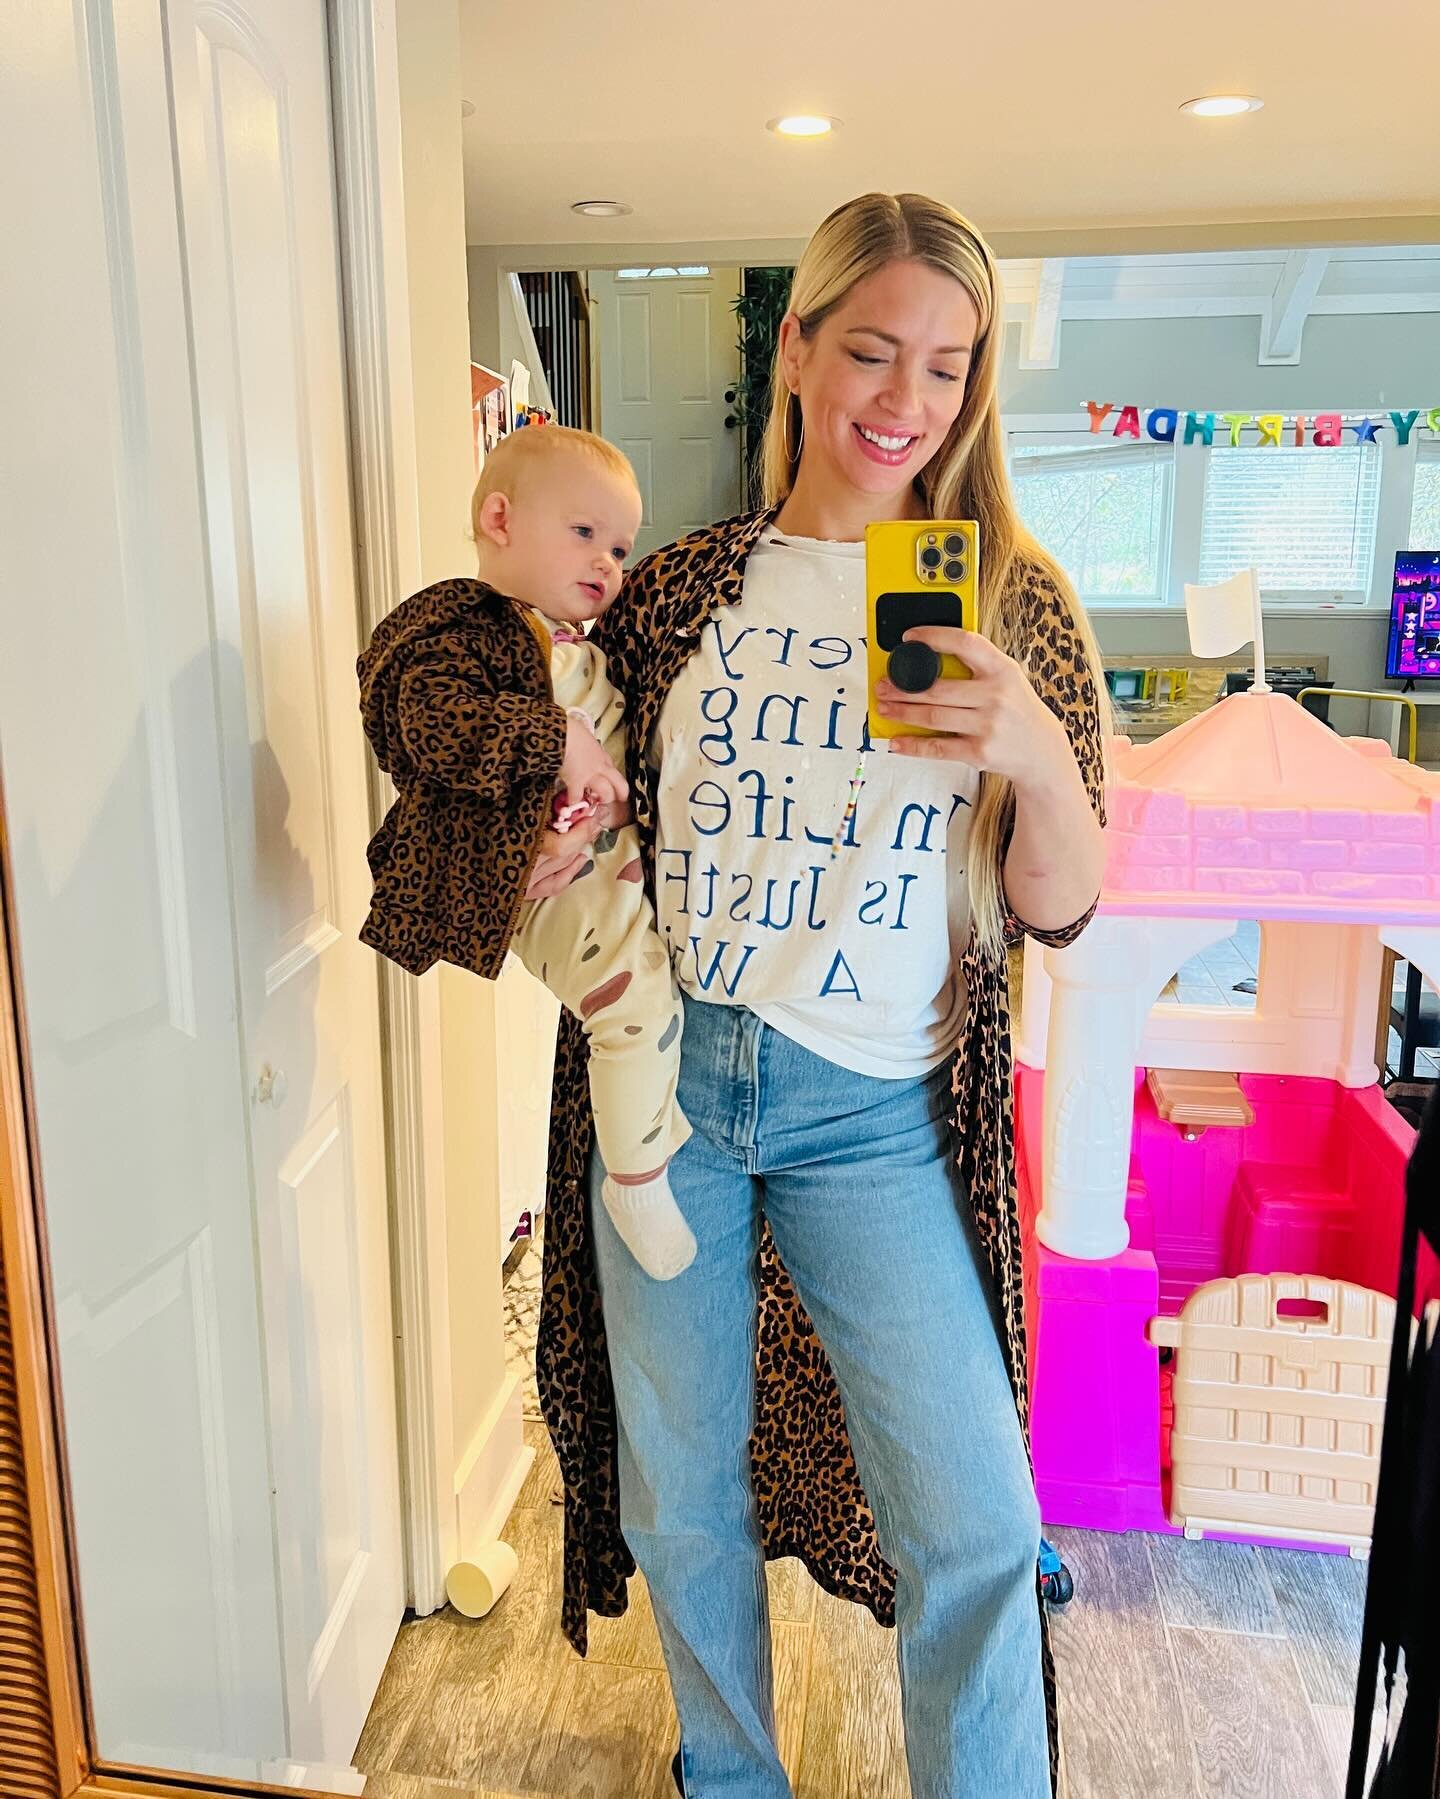 We all had cute outfits on today. T-shirt is hand painted by @feuergod, leopard robe is vintage and these jeans I bought 2 years ago finally fit. 🙃